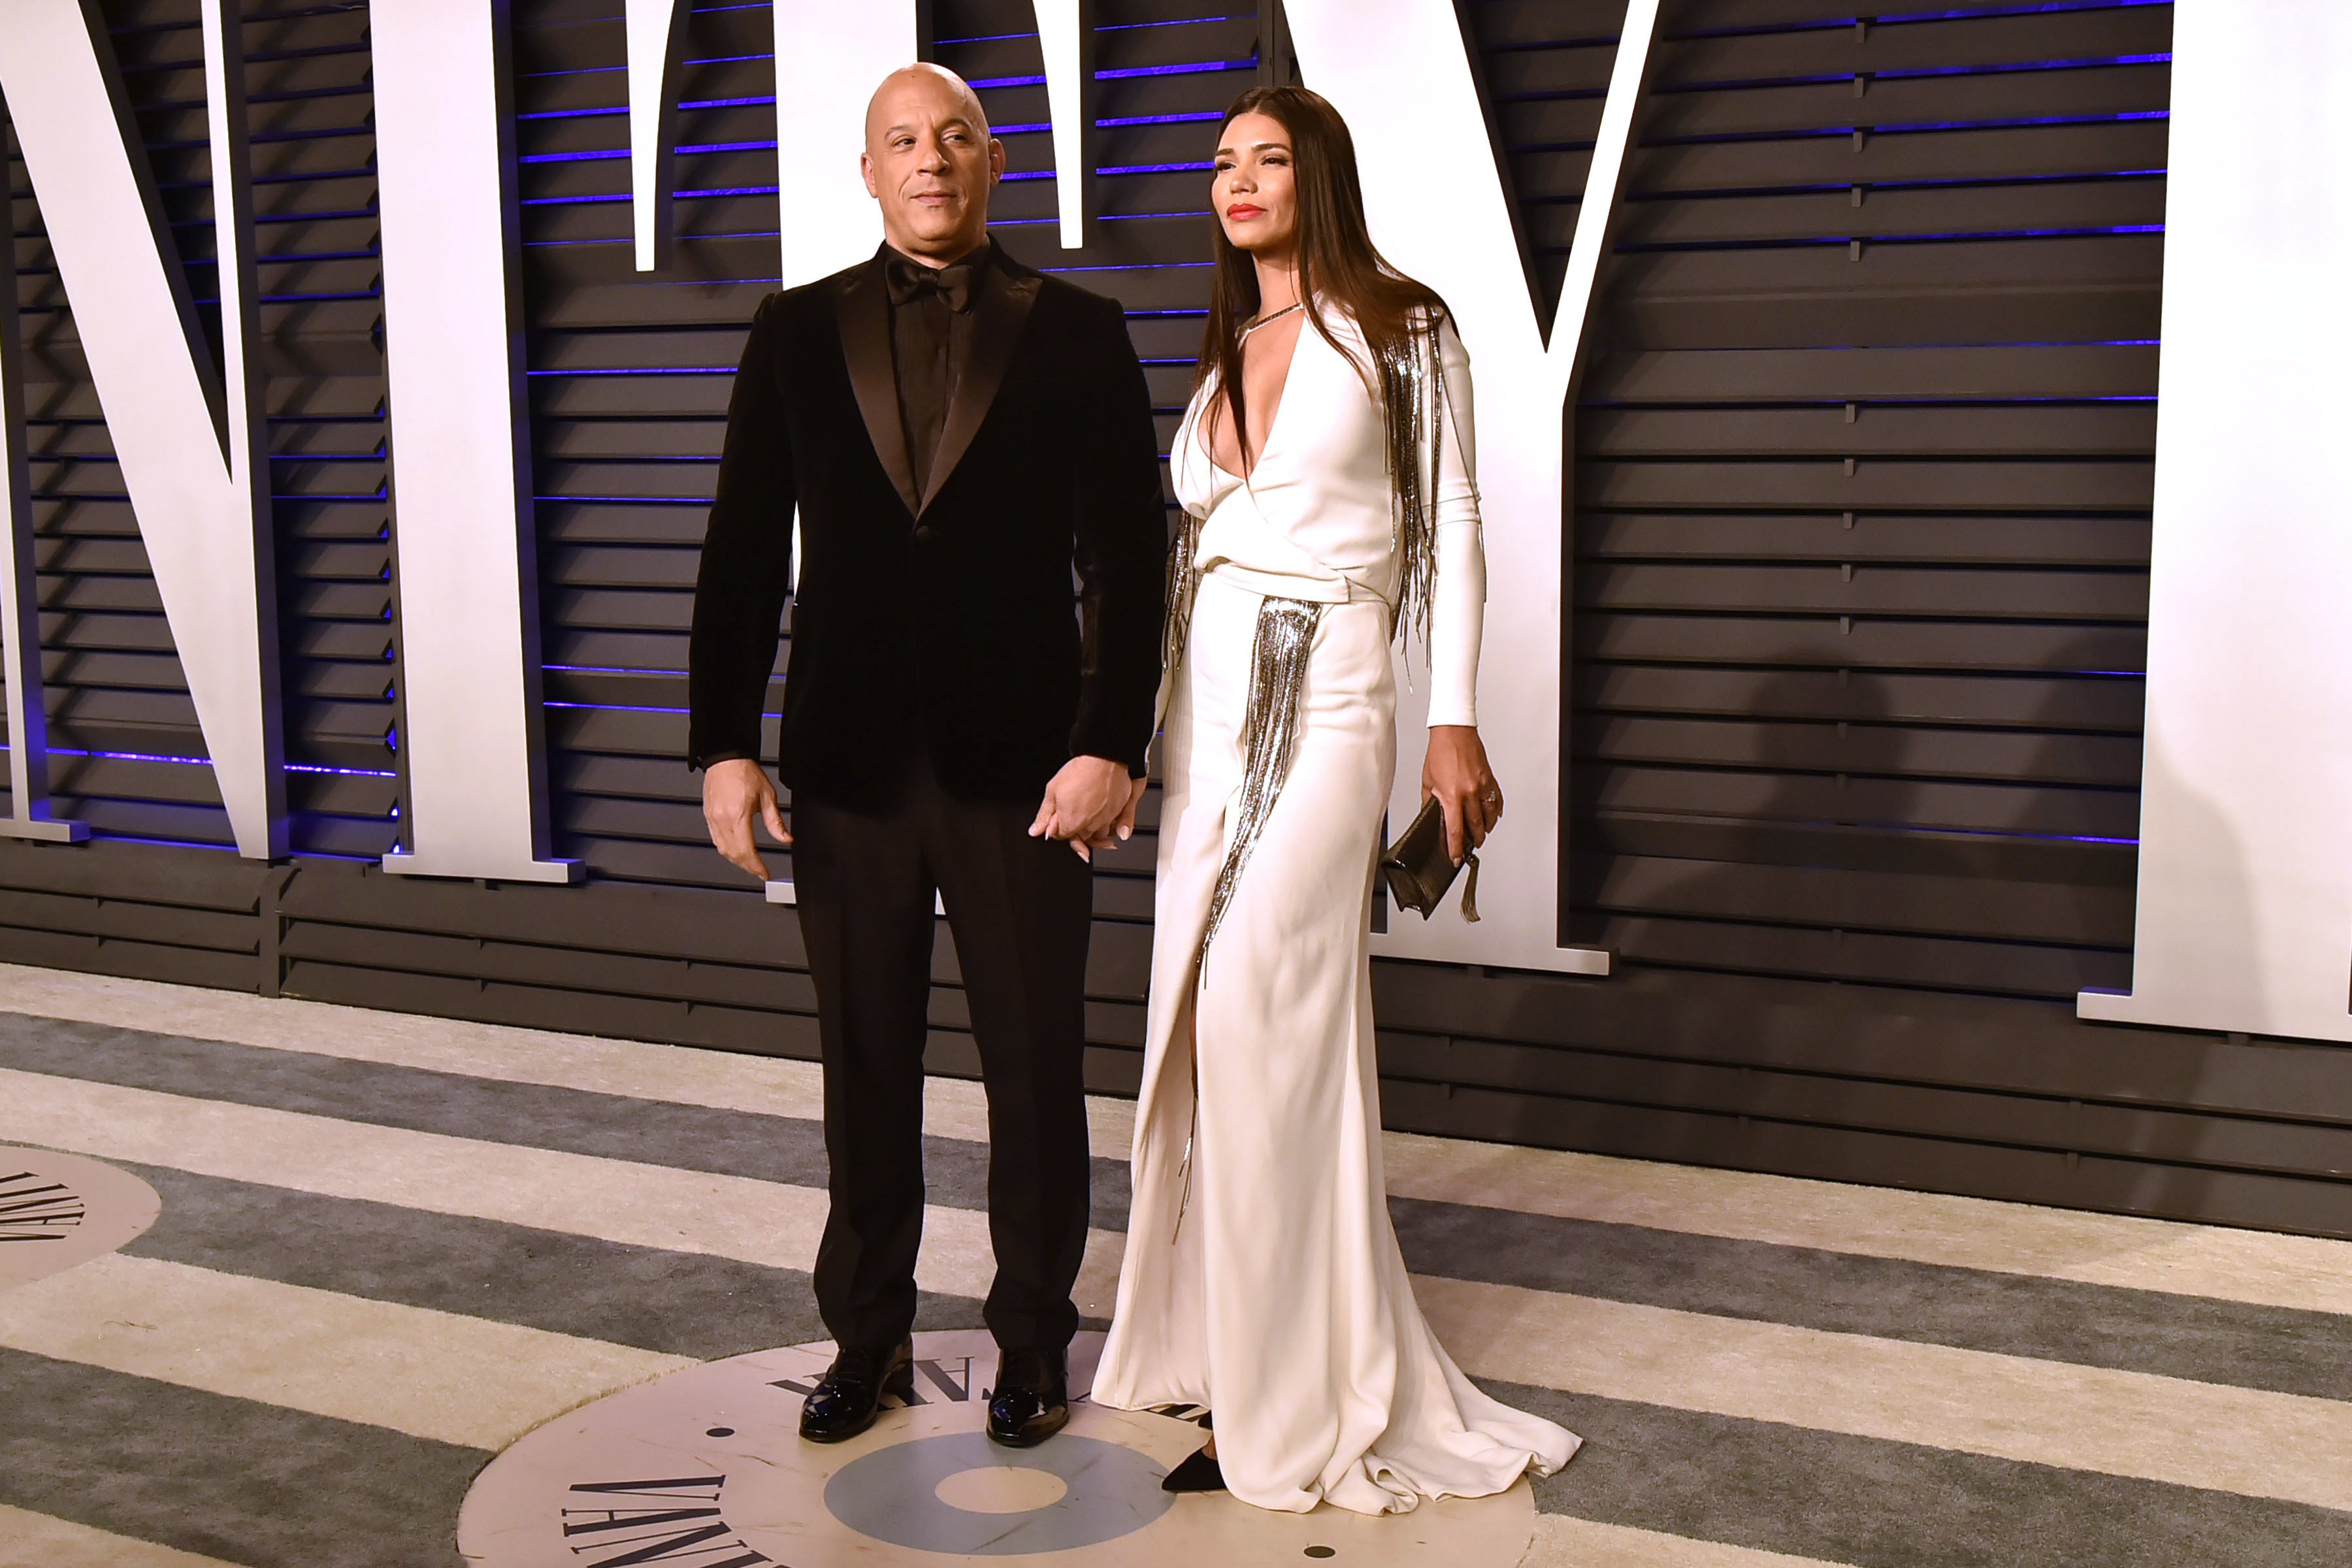 Vin Diesel and Paloma Jimenez attend the 2019 Vanity Fair Oscar Party on February 24, 2019 in Beverly Hills, California | Source: Getty Images